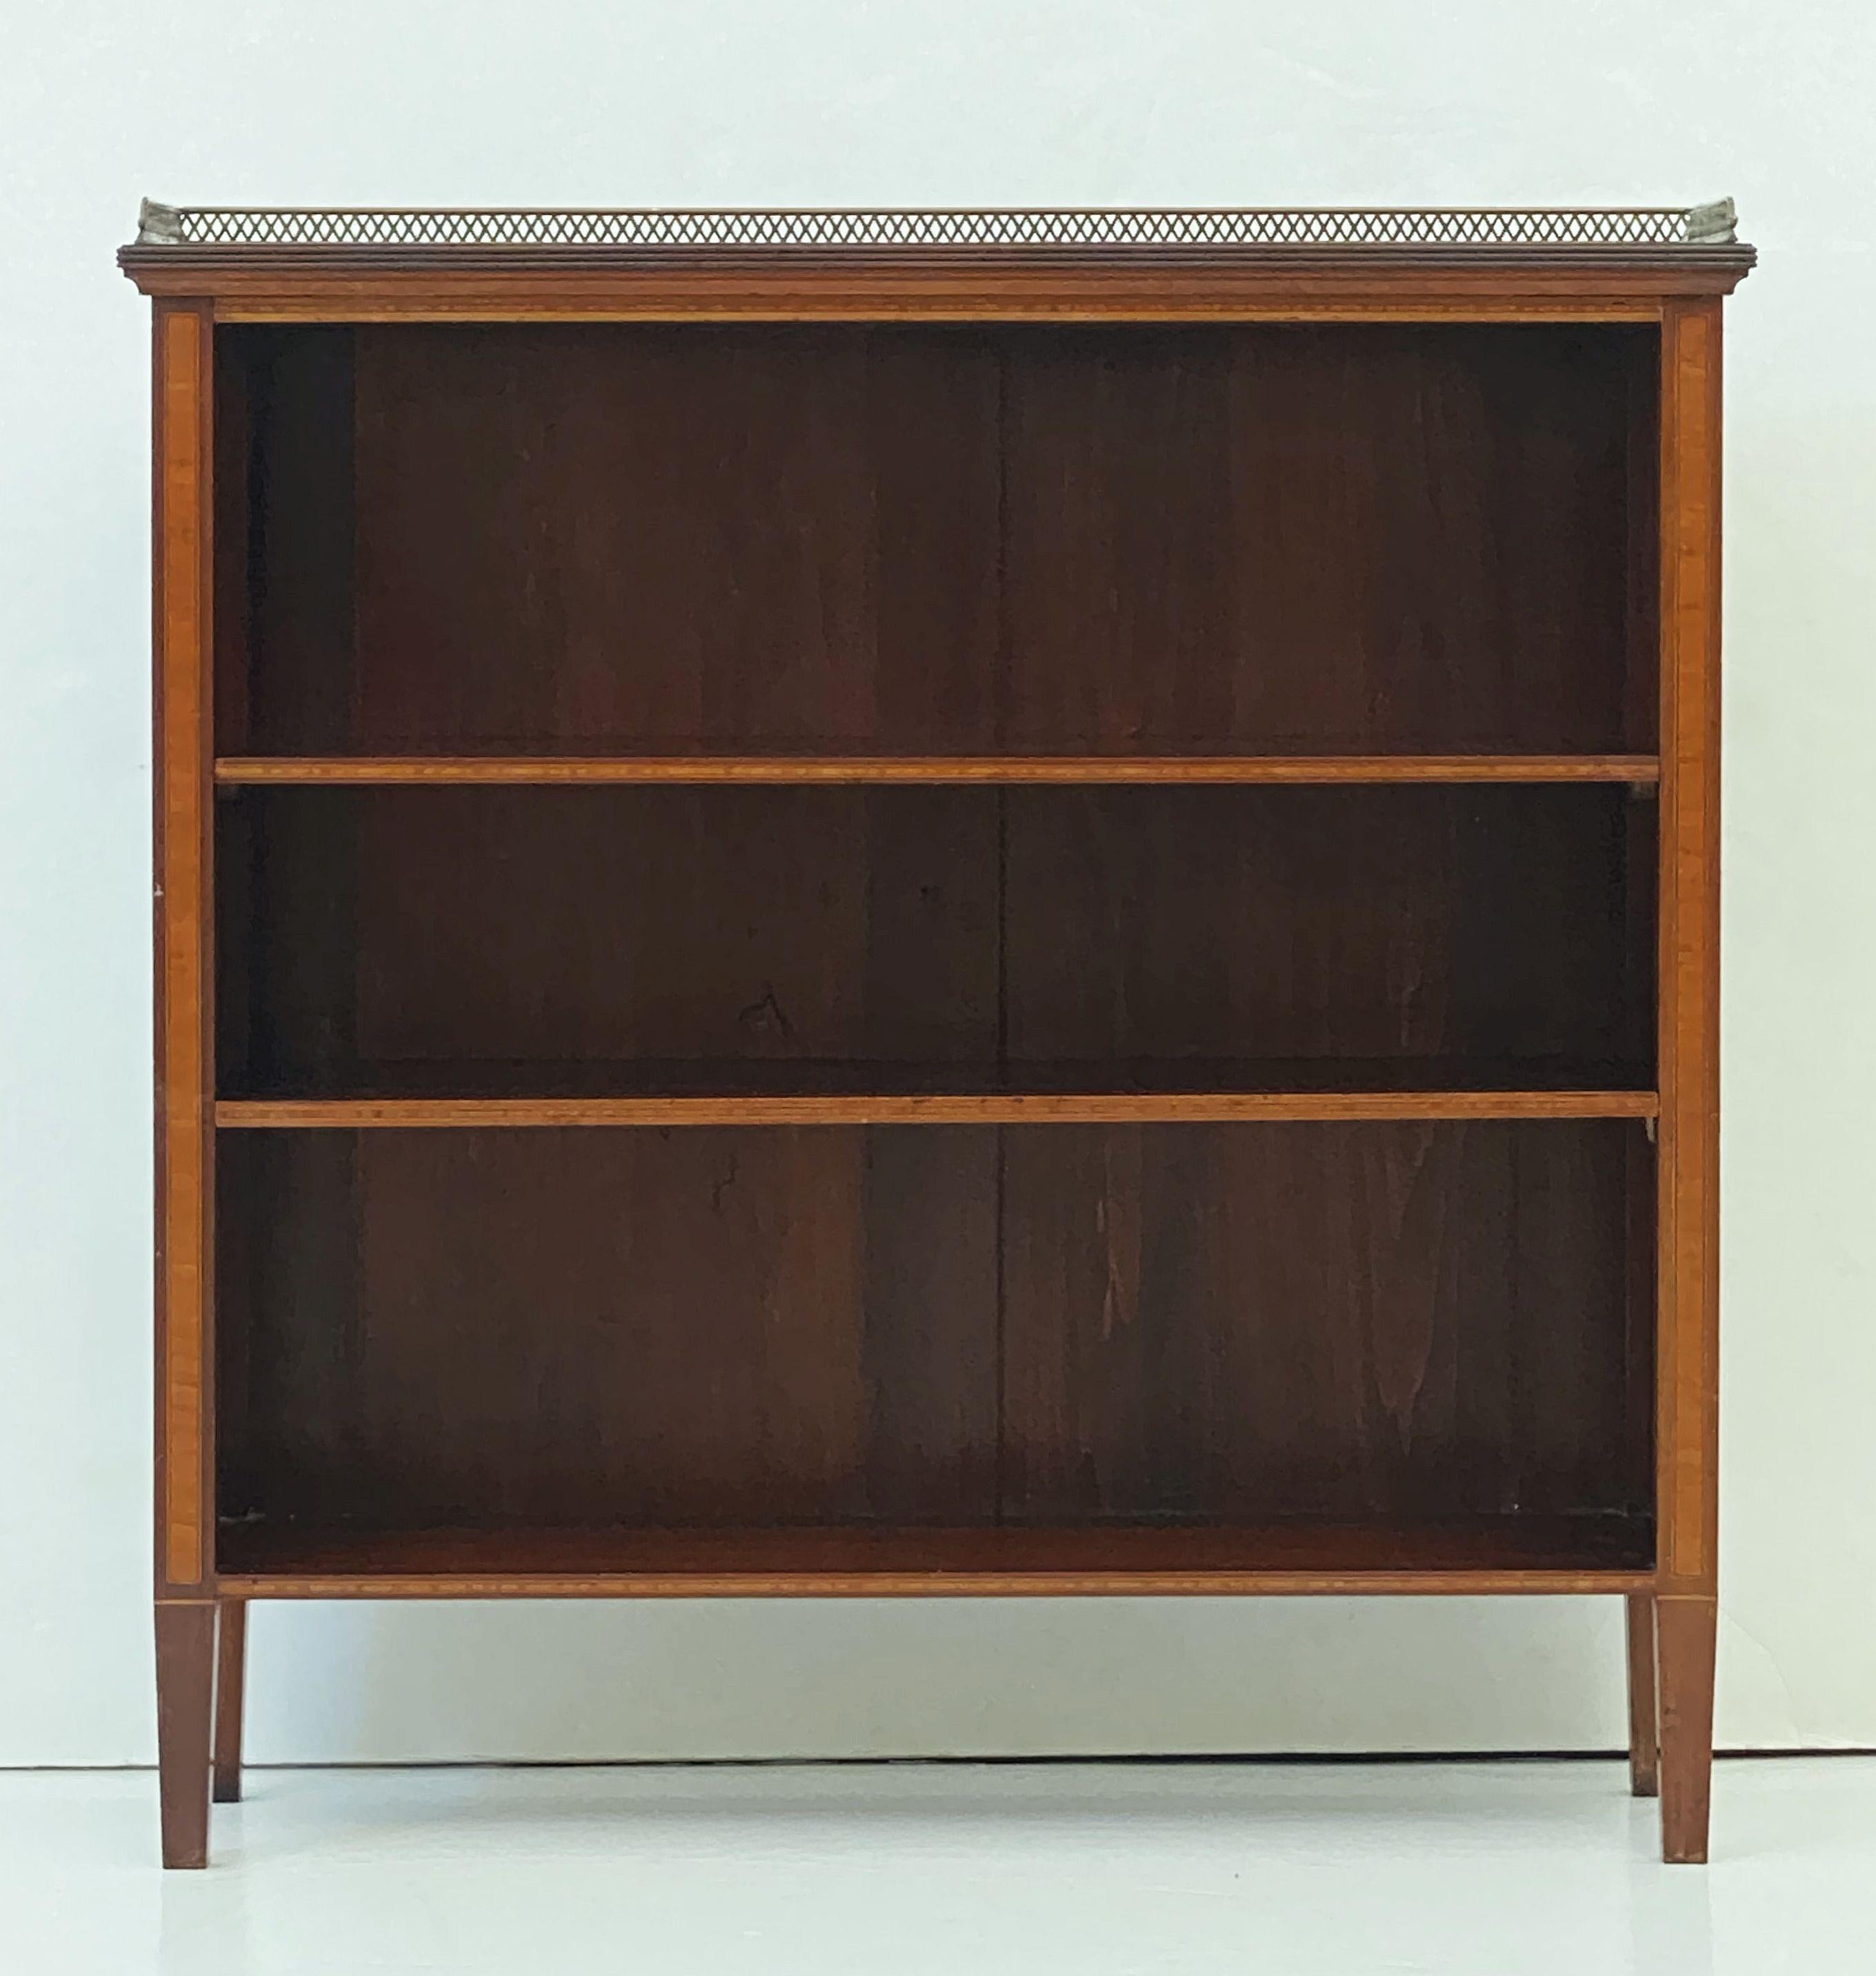 20th Century English Open Bookcase of Inlaid Mahogany from the Edwardian Period